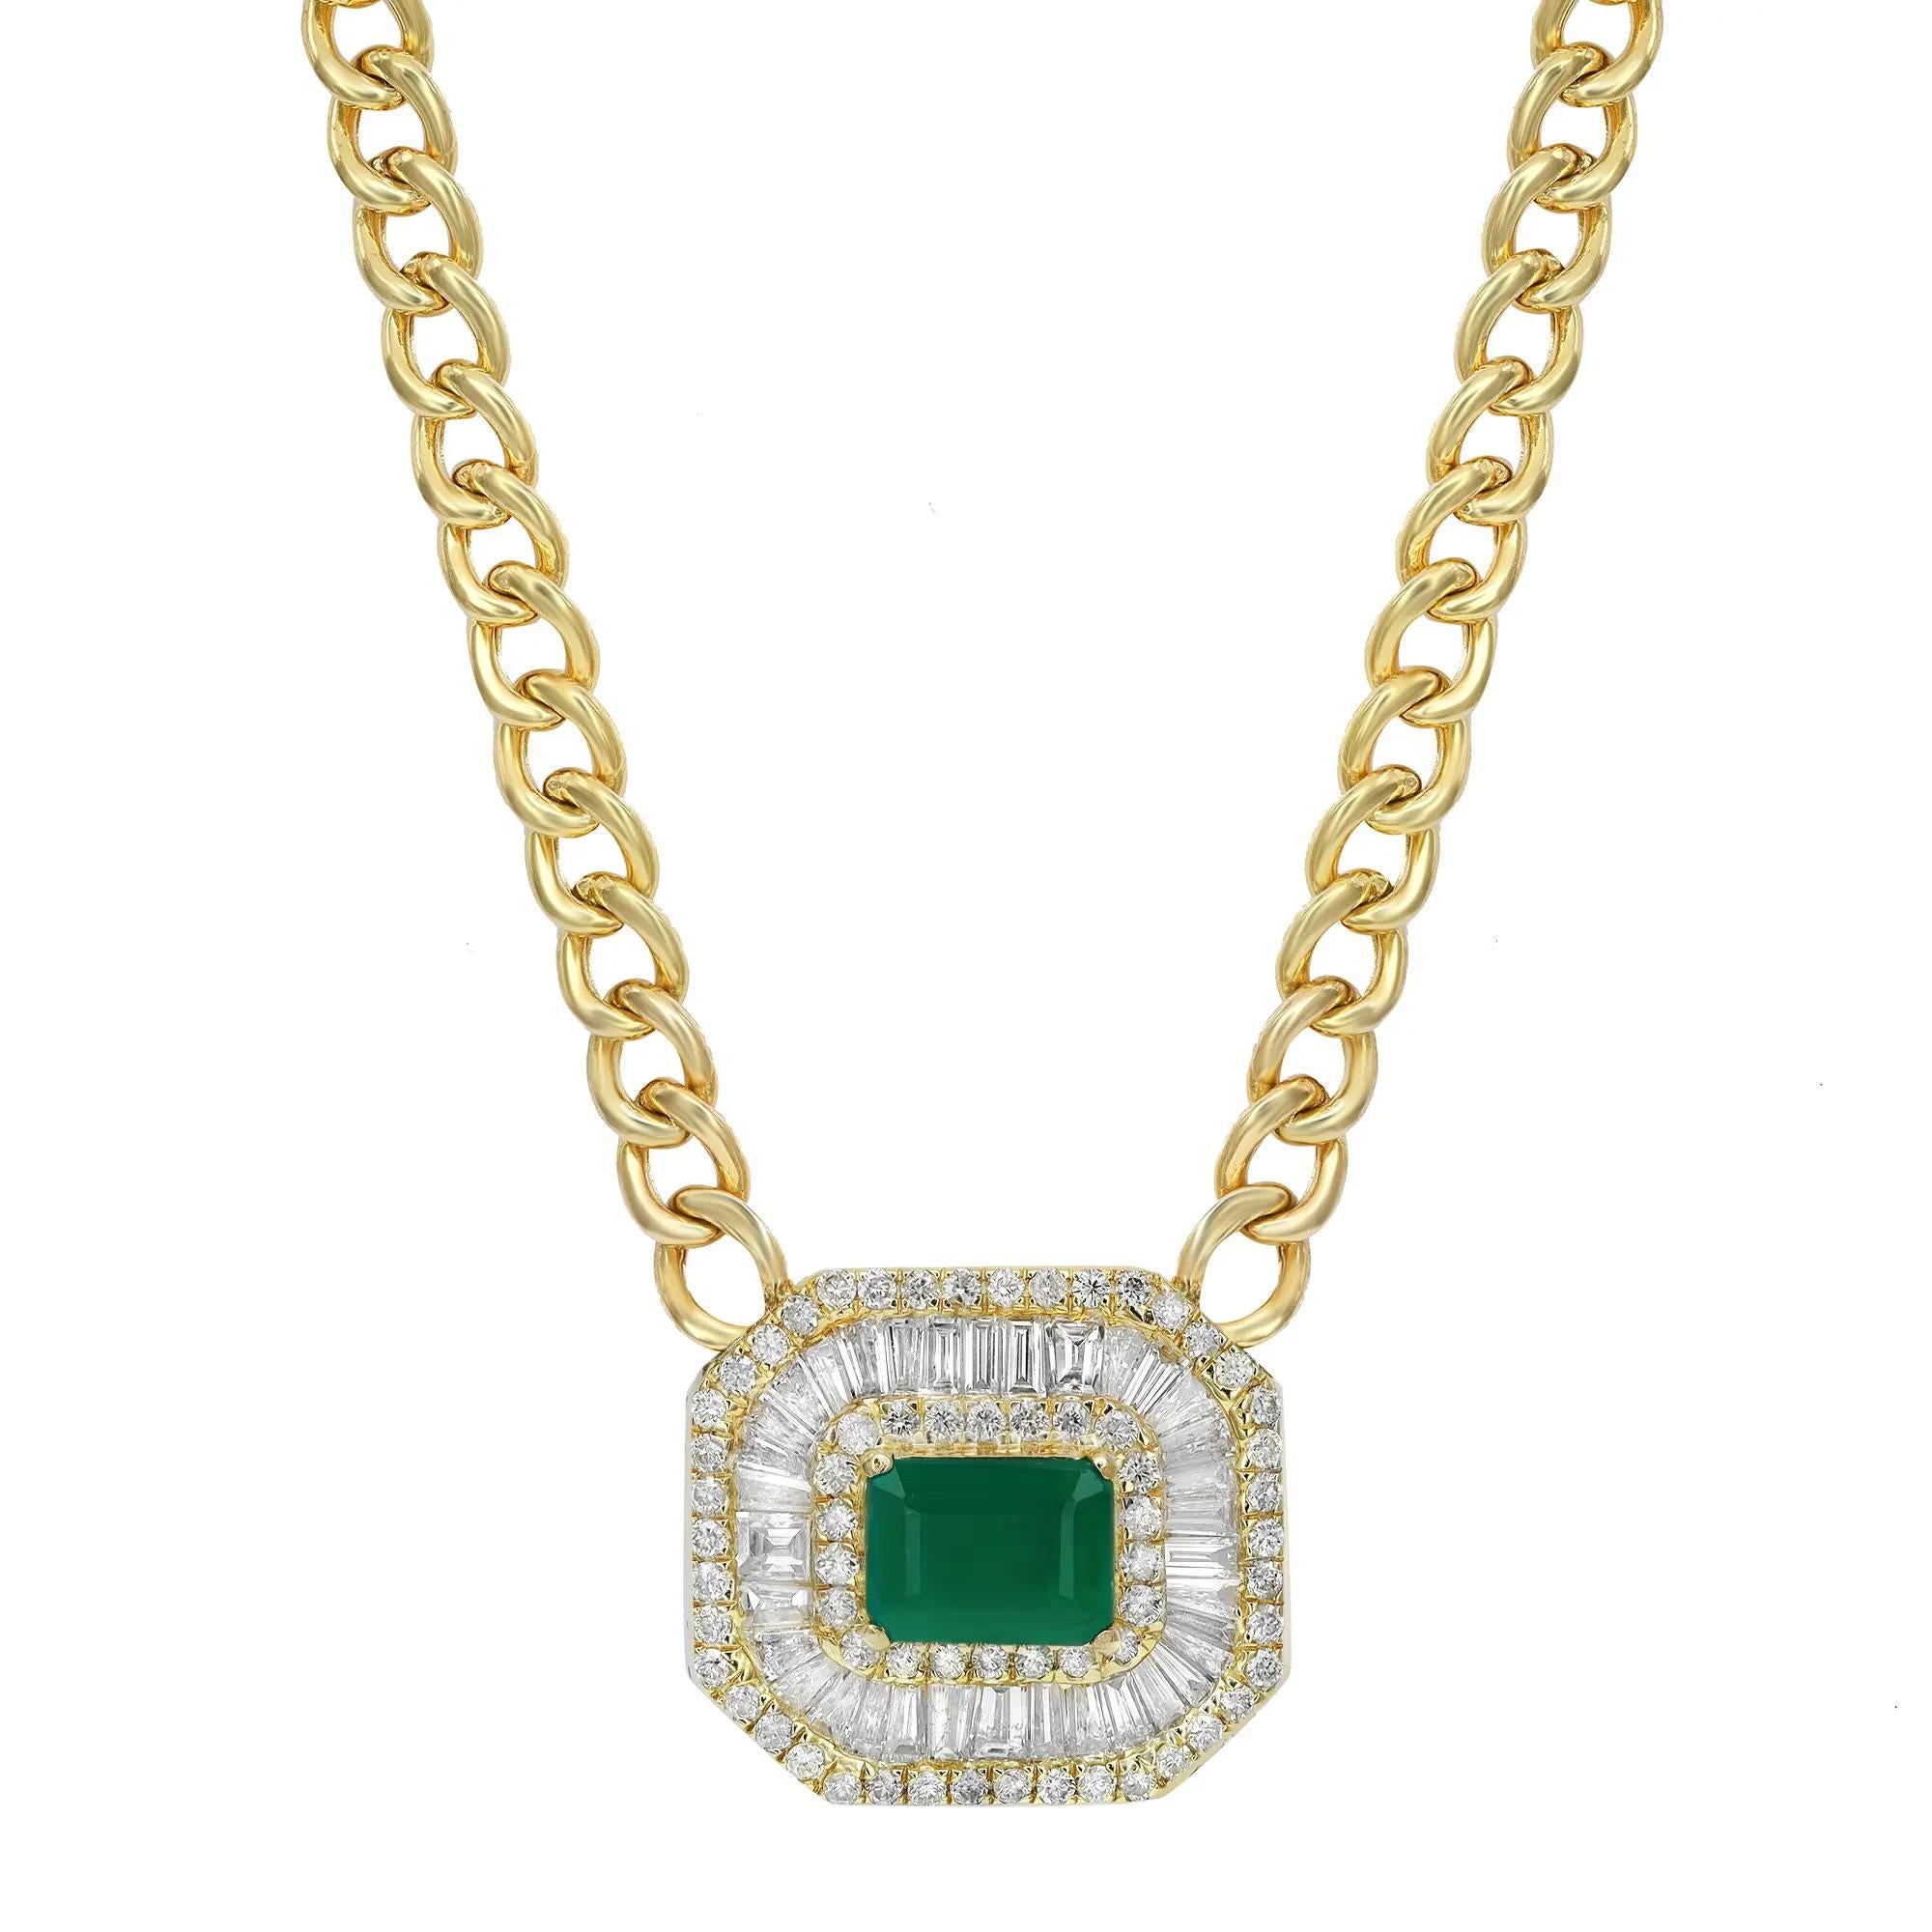 Bring brilliance to your look with this fabulous emerald and diamond pendant necklace. A perfect accent to everyday and evening looks with a touch of chic to any ensemble you pair it with. It features an octagon shape pendant showcasing a center